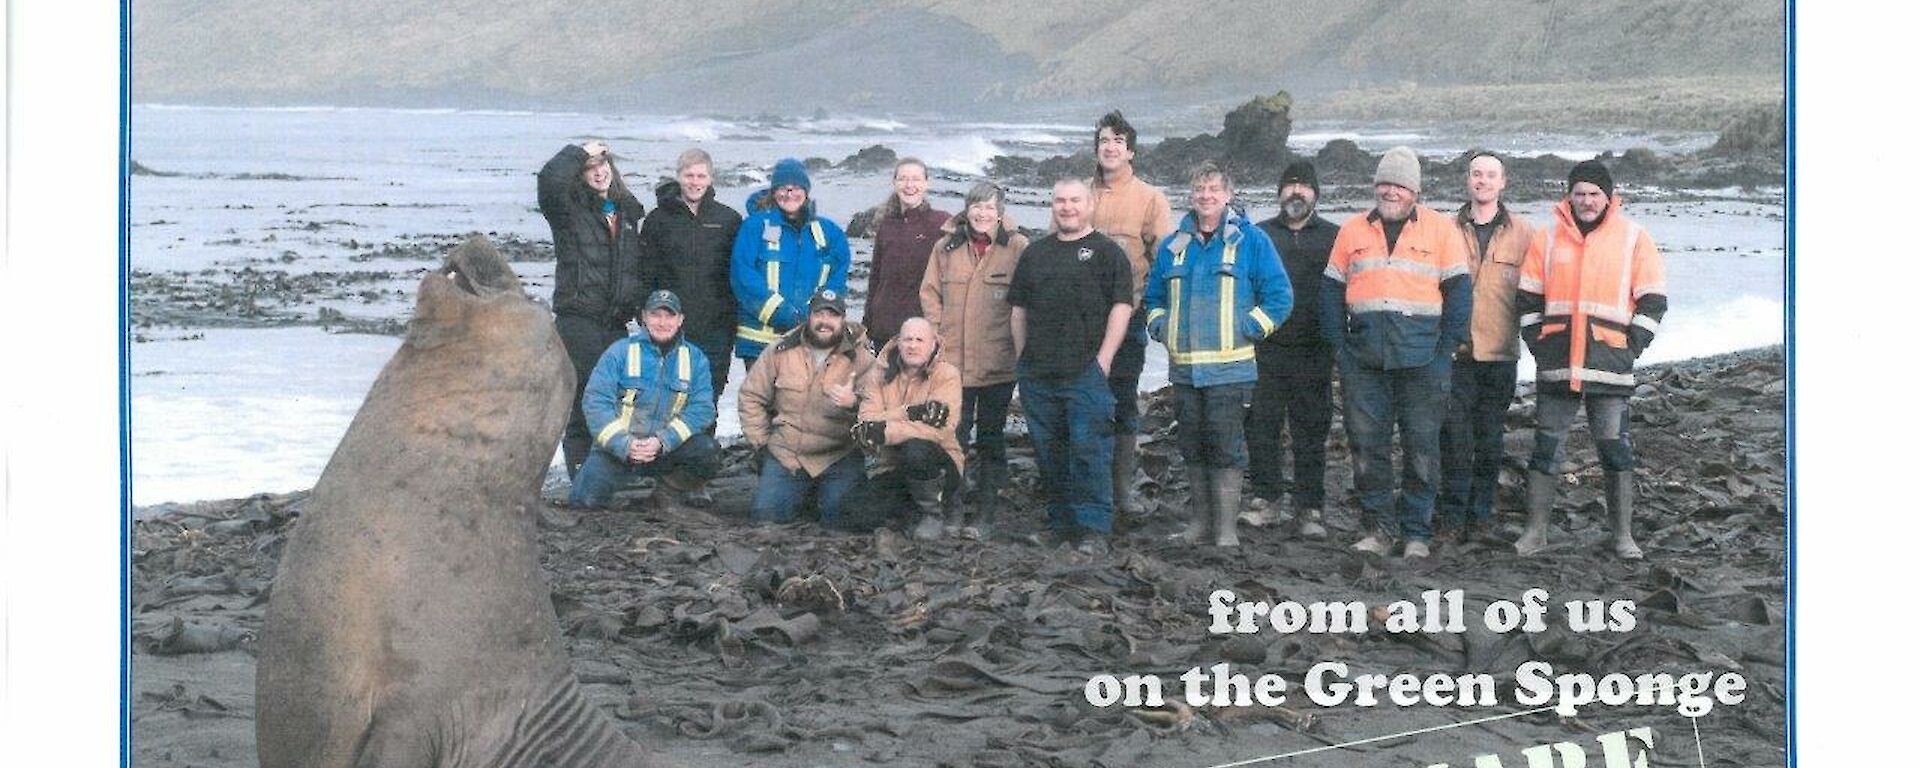 A group photo of the macquarie Island winterers with an elephant seal in foreground